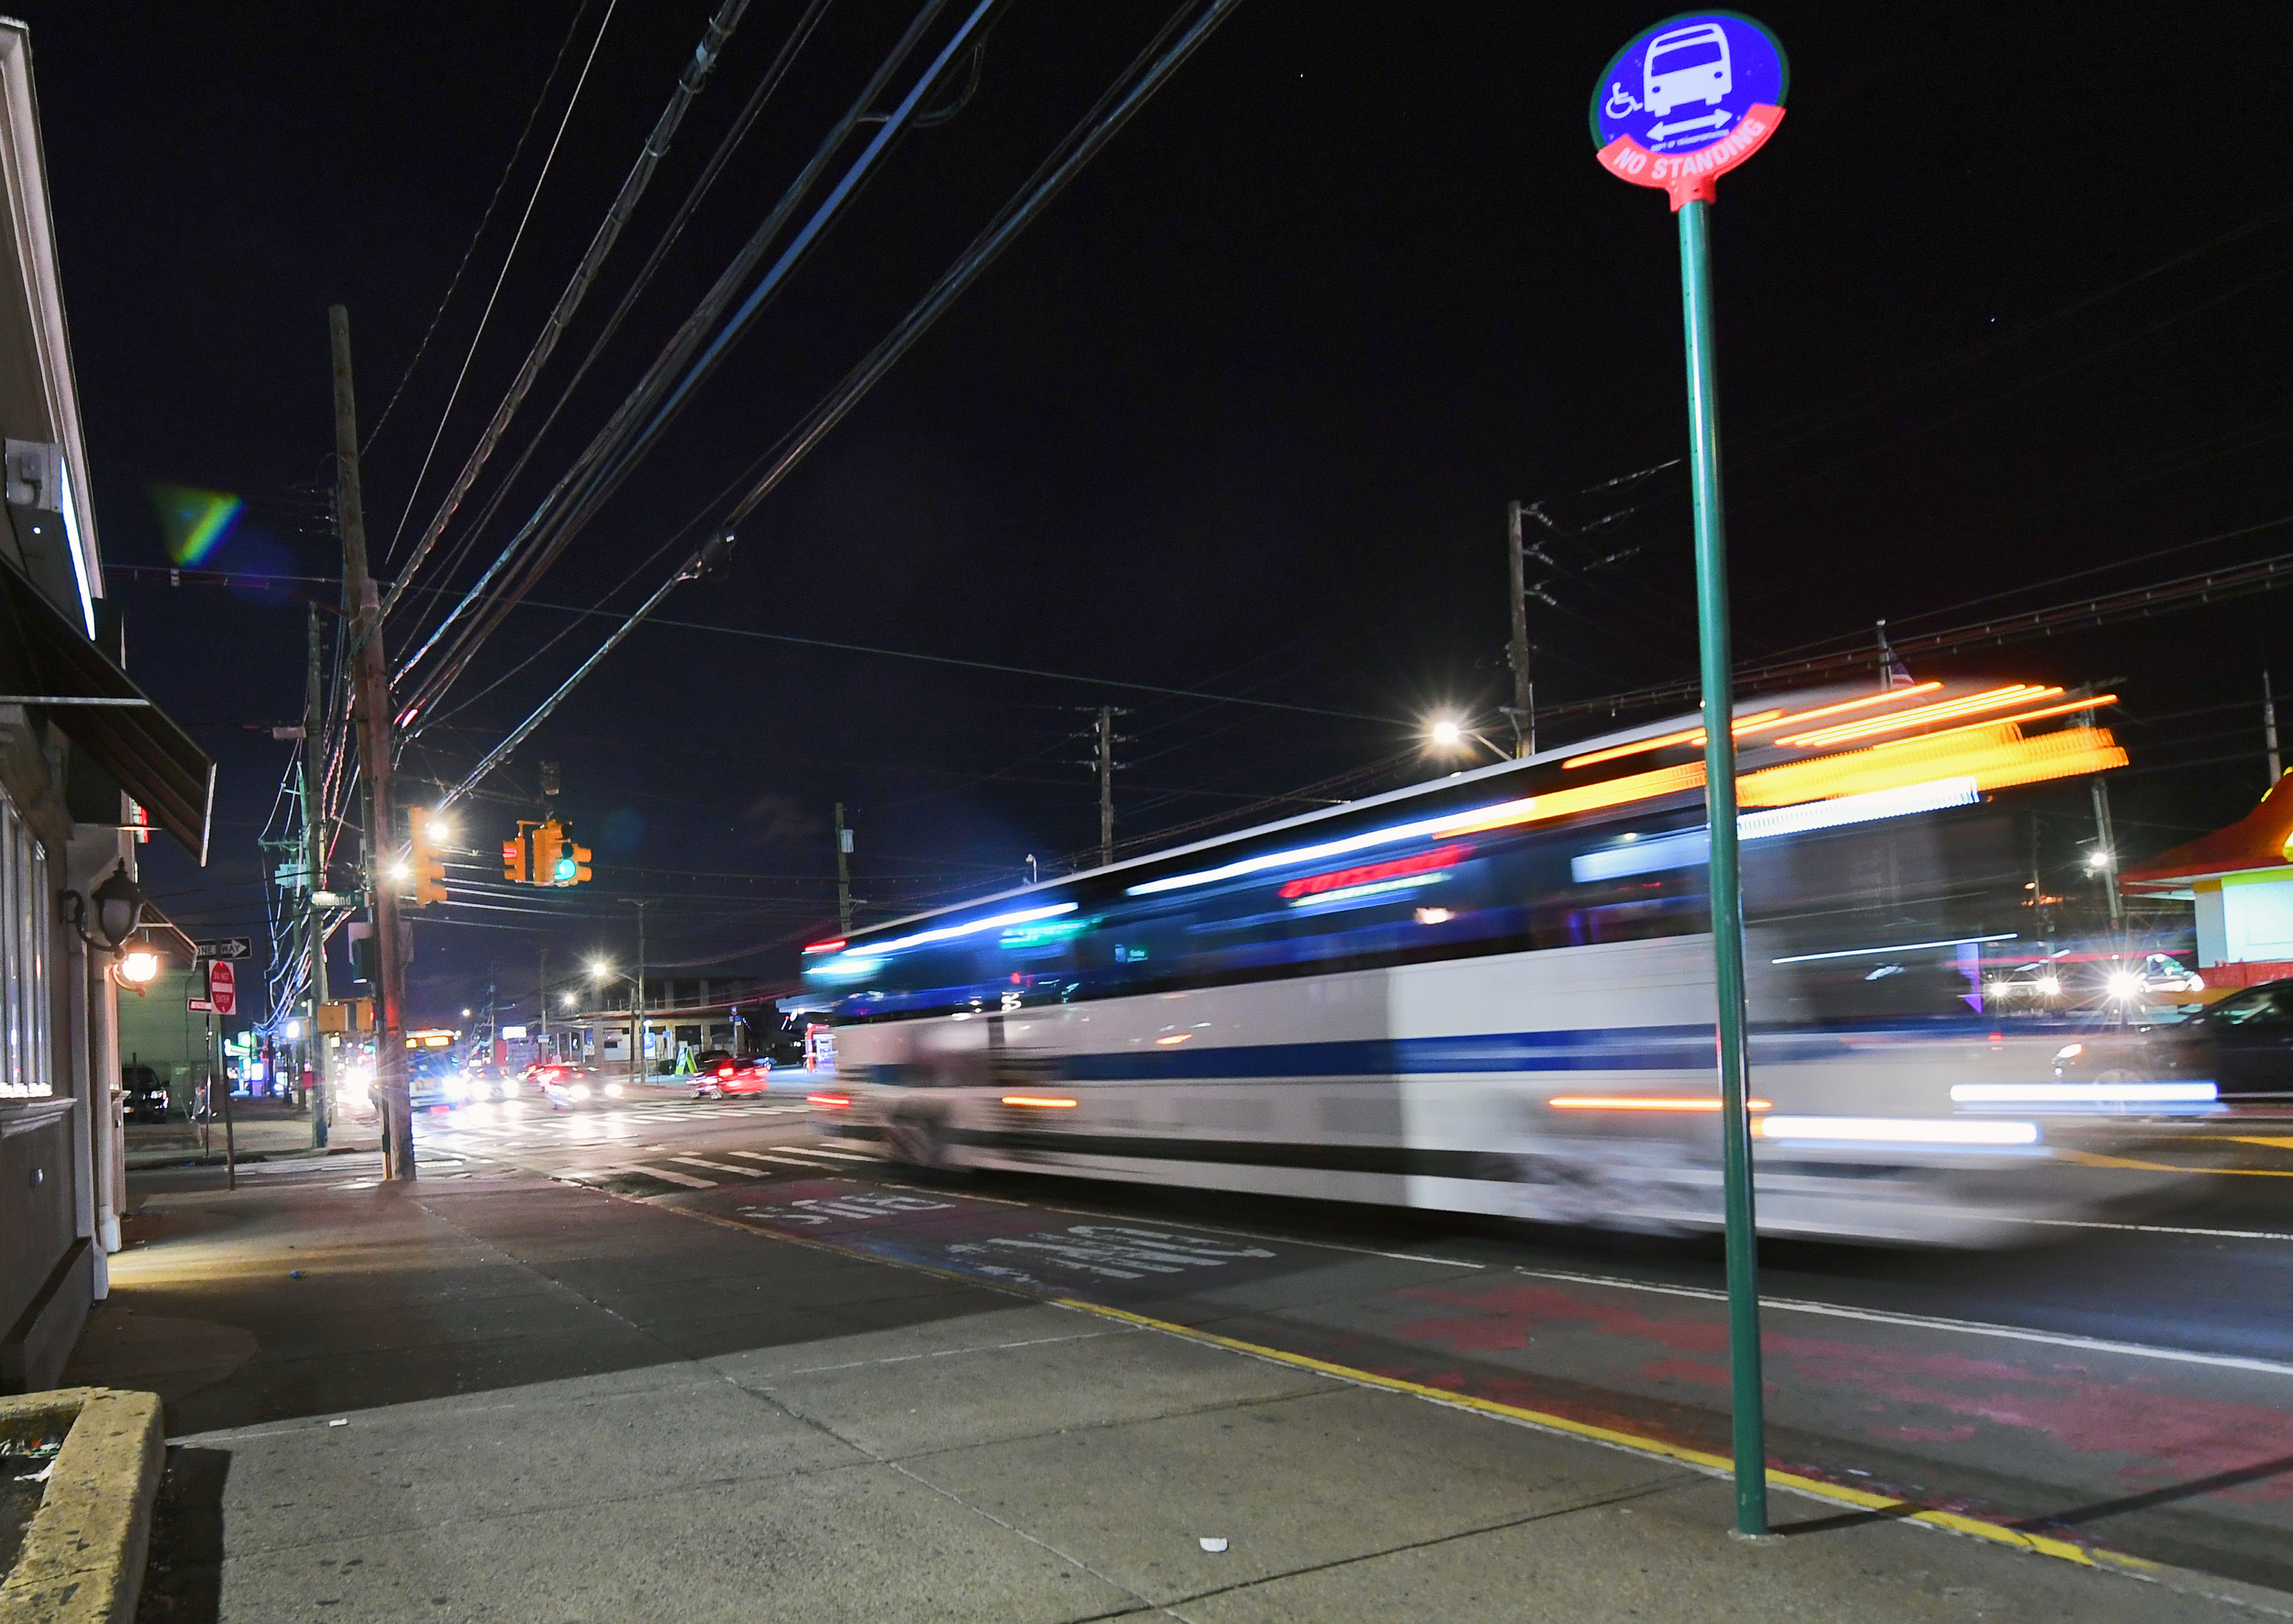 Long exposure shot of a bus pulling up to a stop.